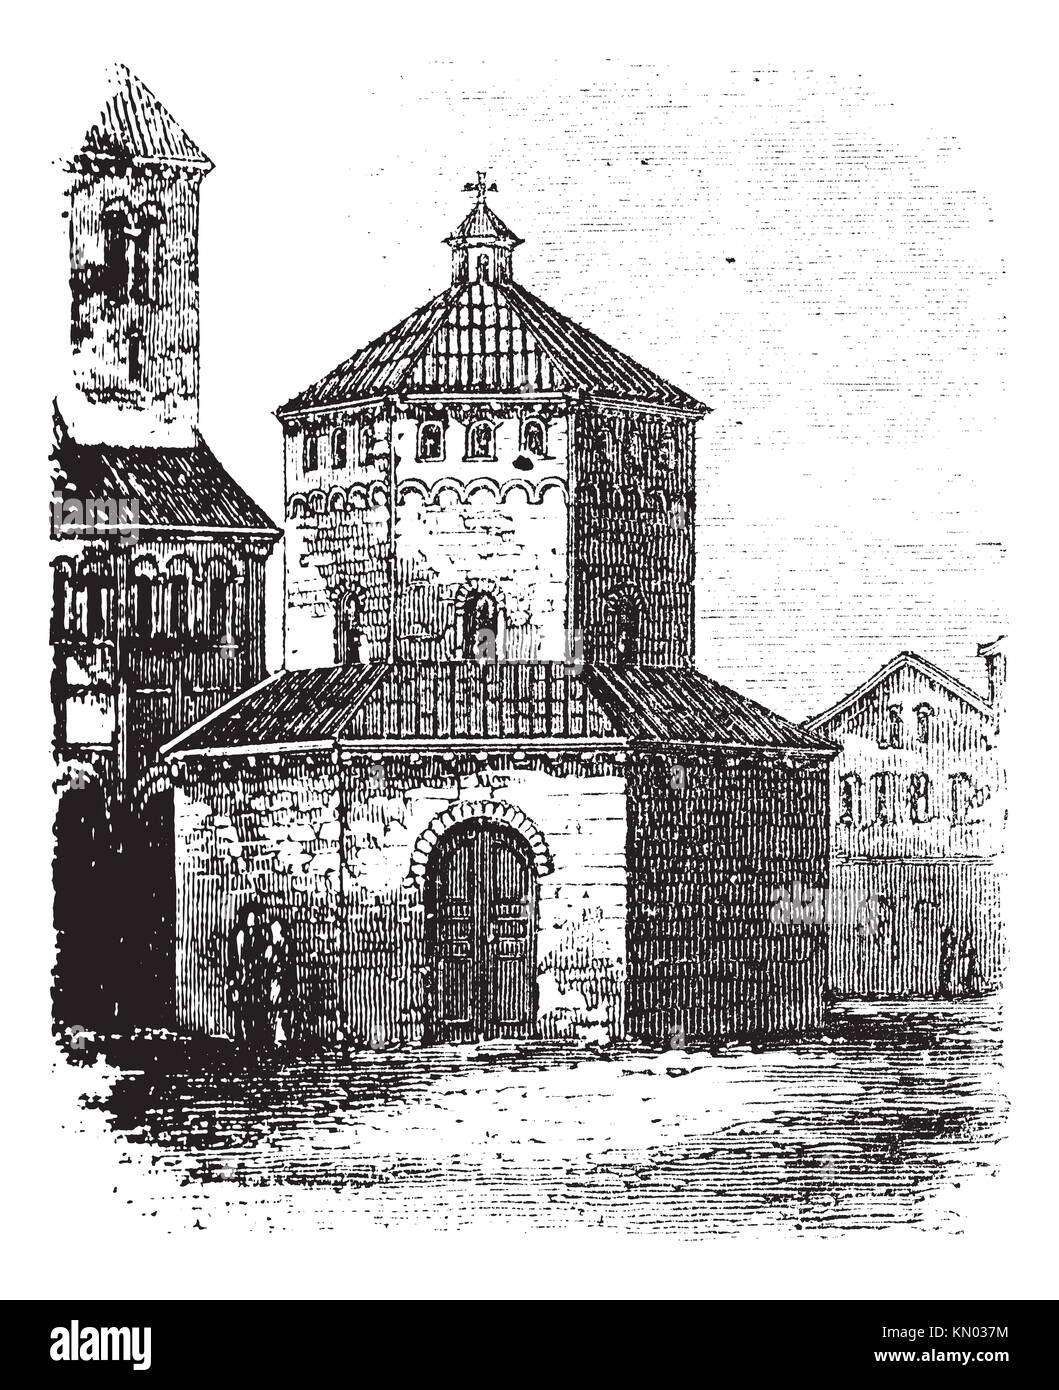 Baptistry of Novara, in Piedmont, Italy, during the 1890s, vintage engraving  Old engraved illustration of the Baptistry of Novara Stock Photo